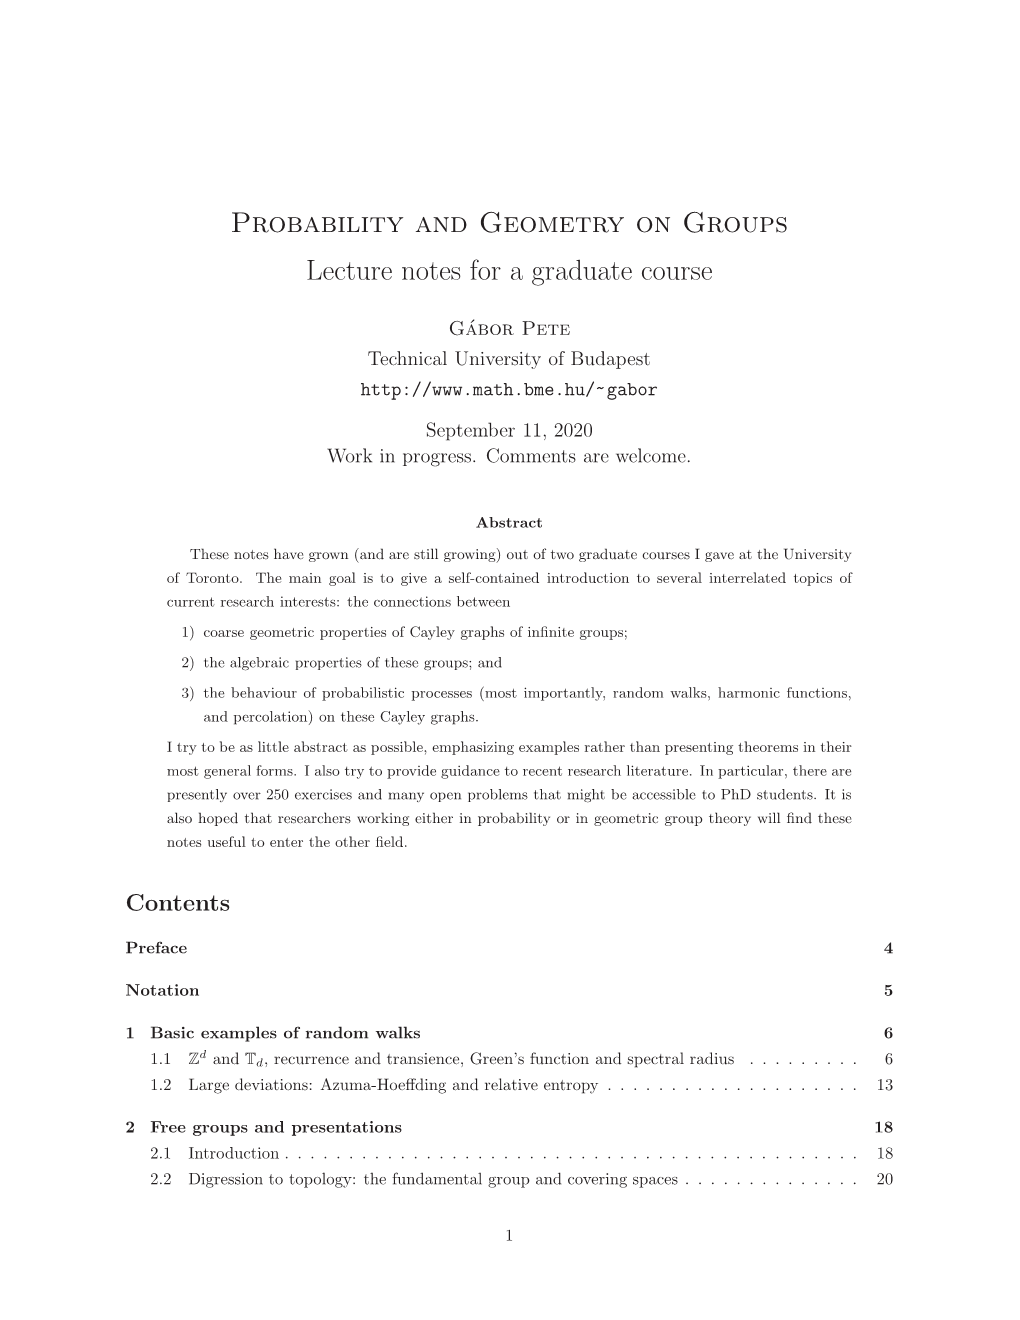 Probability and Geometry on Groups Lecture Notes for a Graduate Course